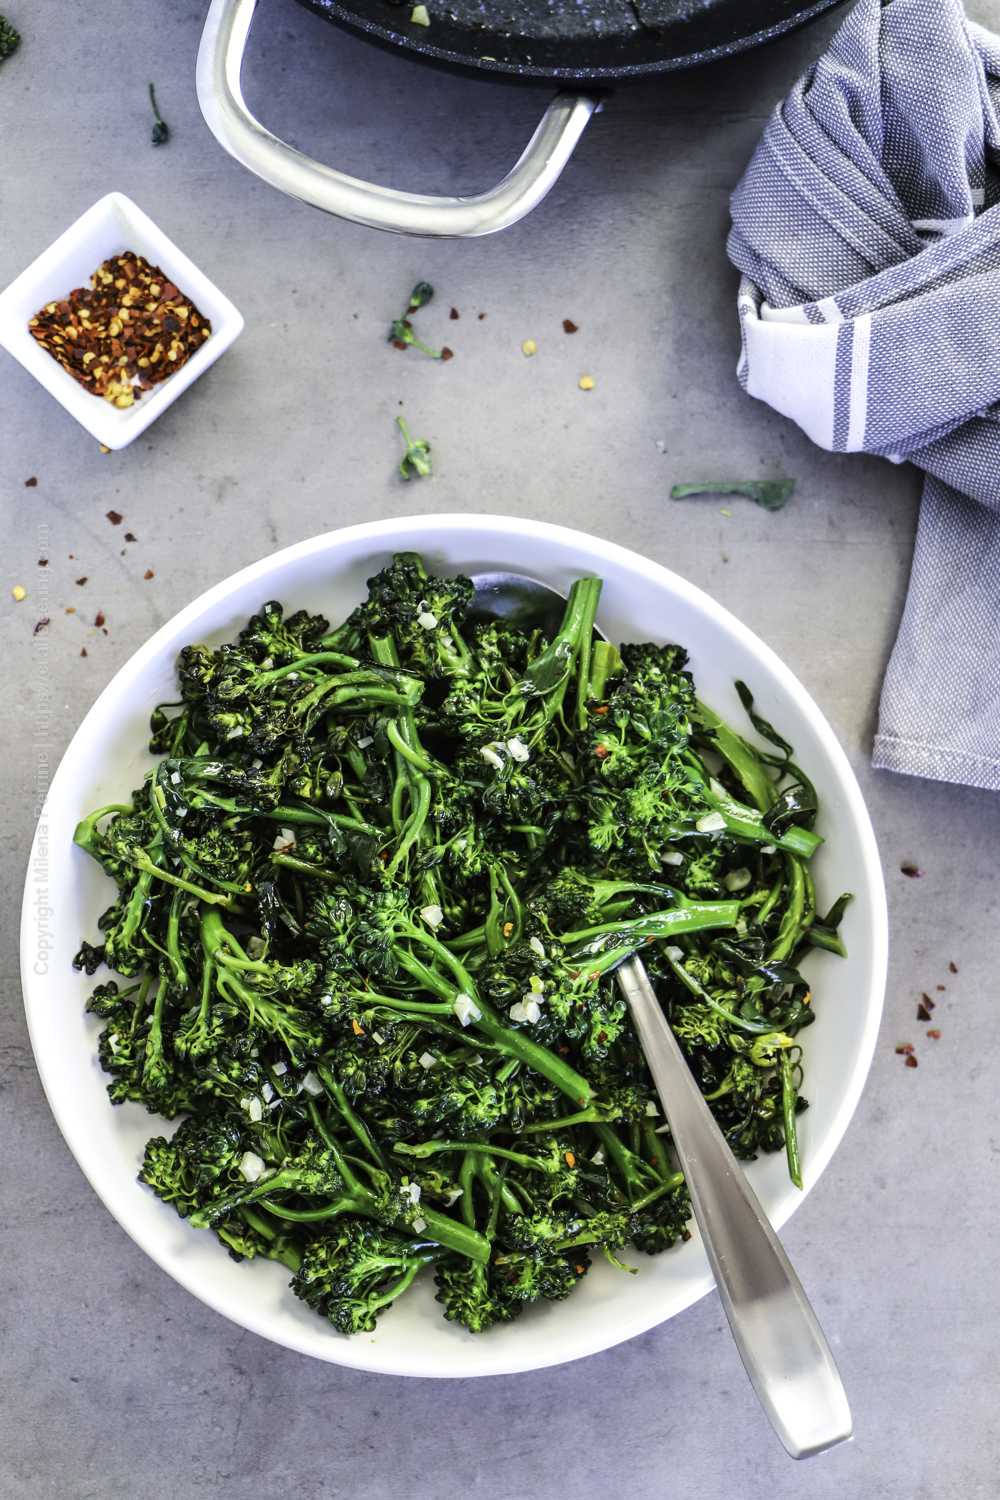 Broccolini with garlic and red pepper flakes.